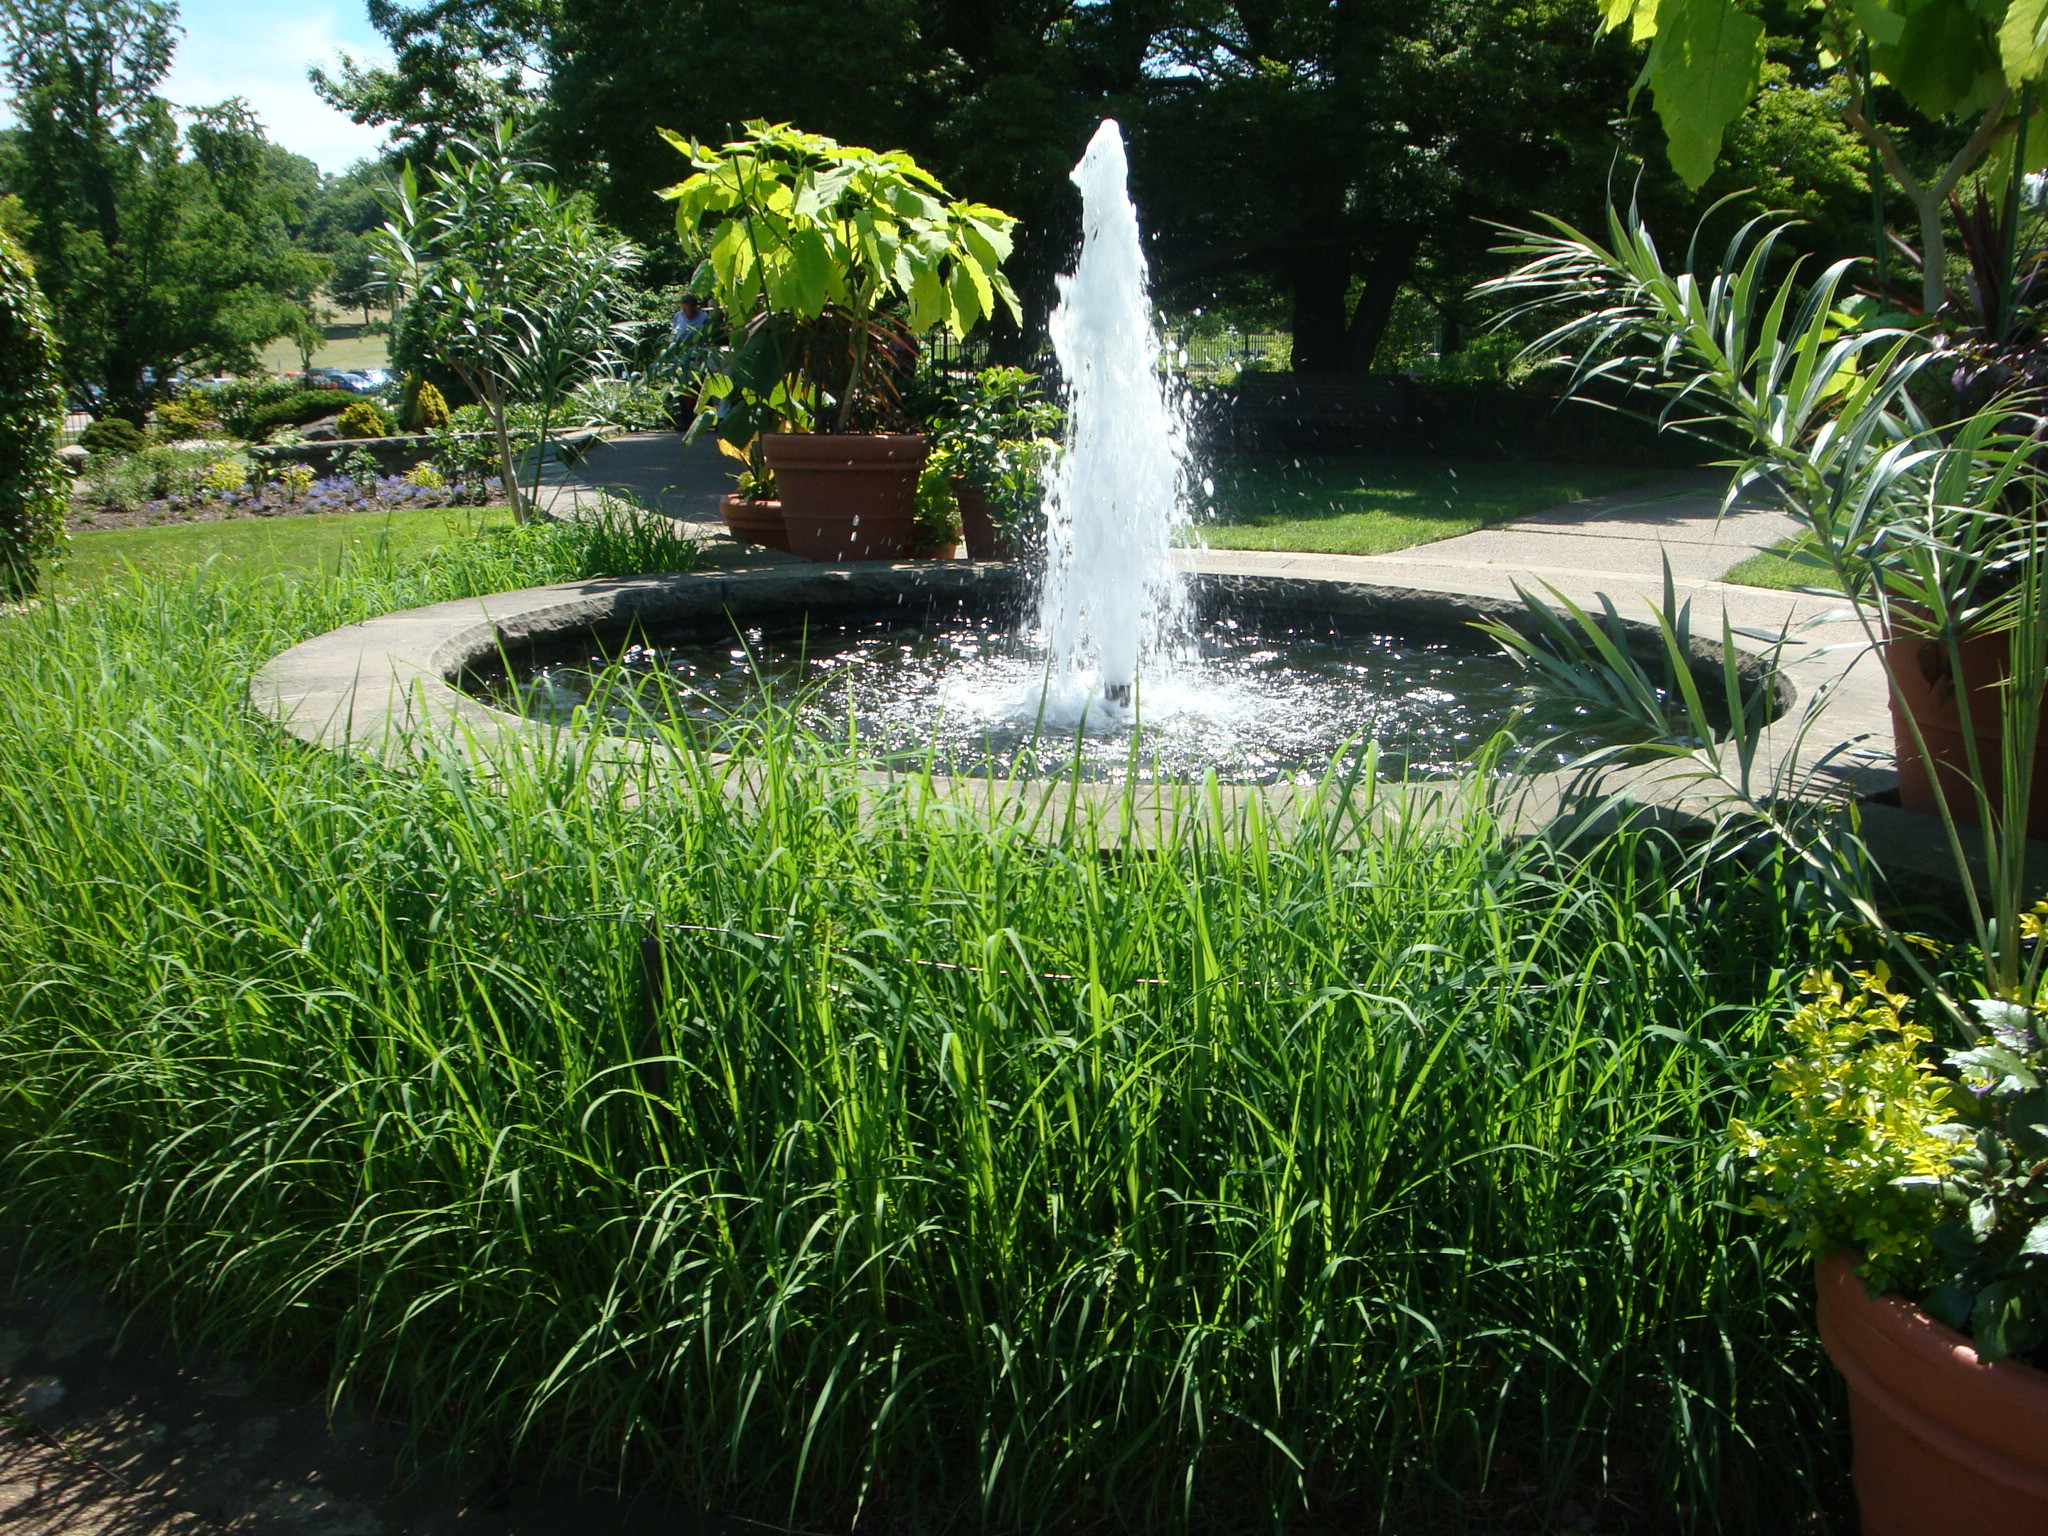 Landscape Water Fountains
 Formal Water Features in Landscape Design Revolutionary